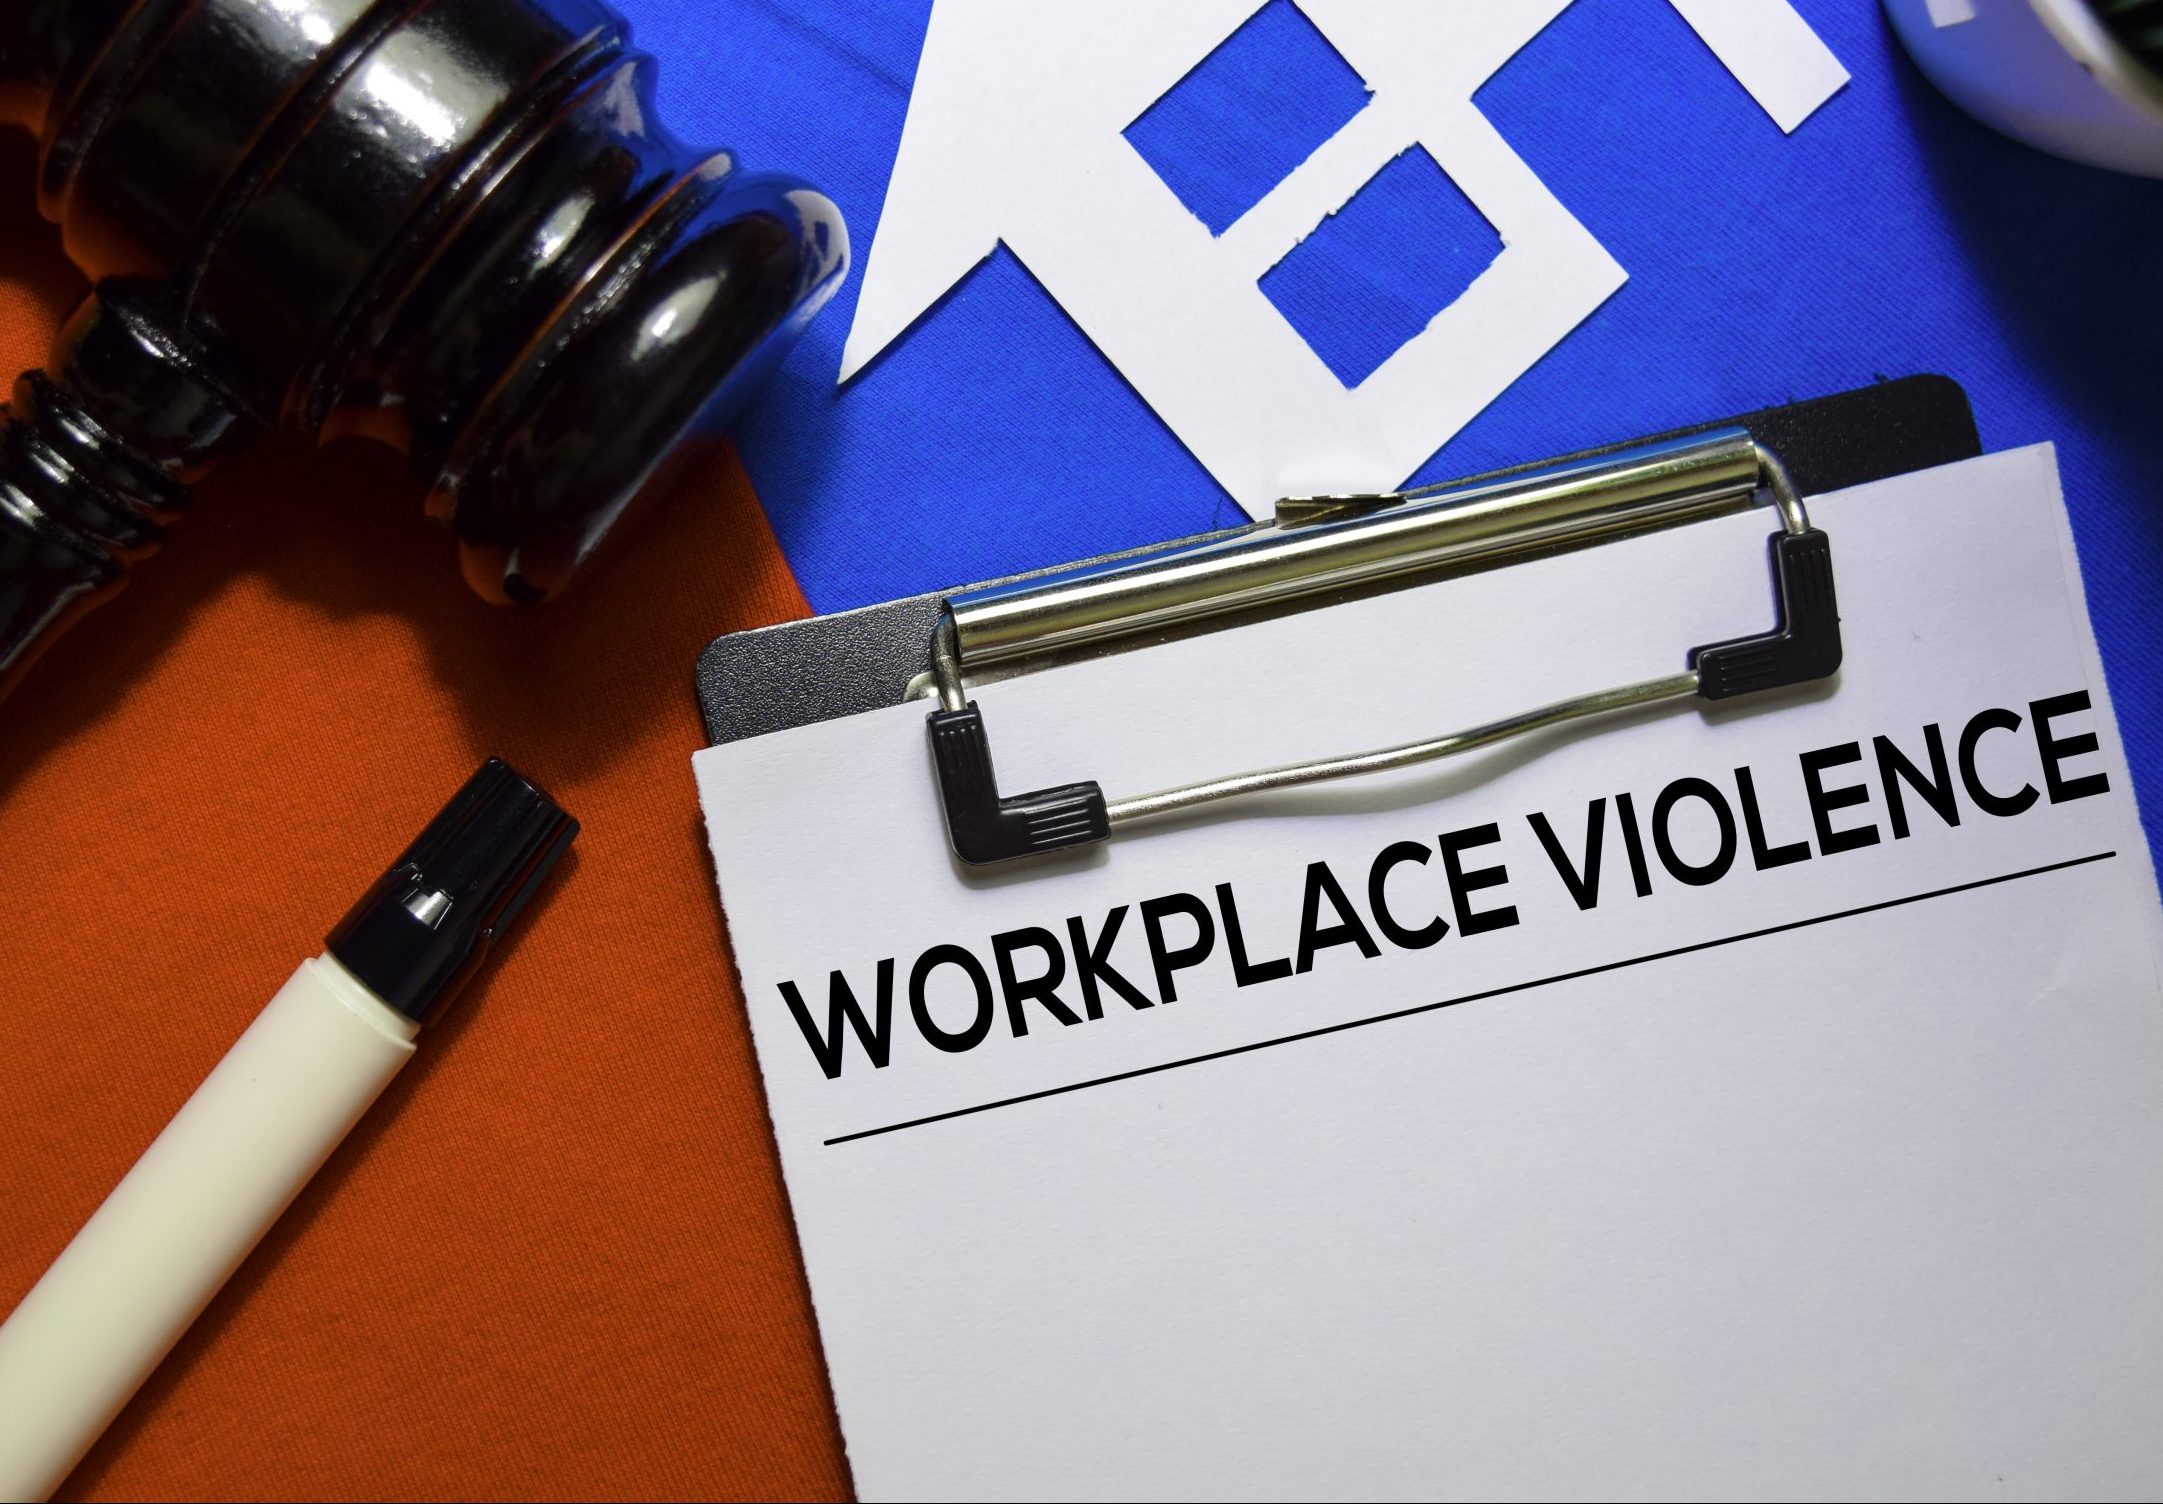 AdobeStock 290155549 scaled e1644333476785 - USA: Suicide of whistleblower after workplace bullying